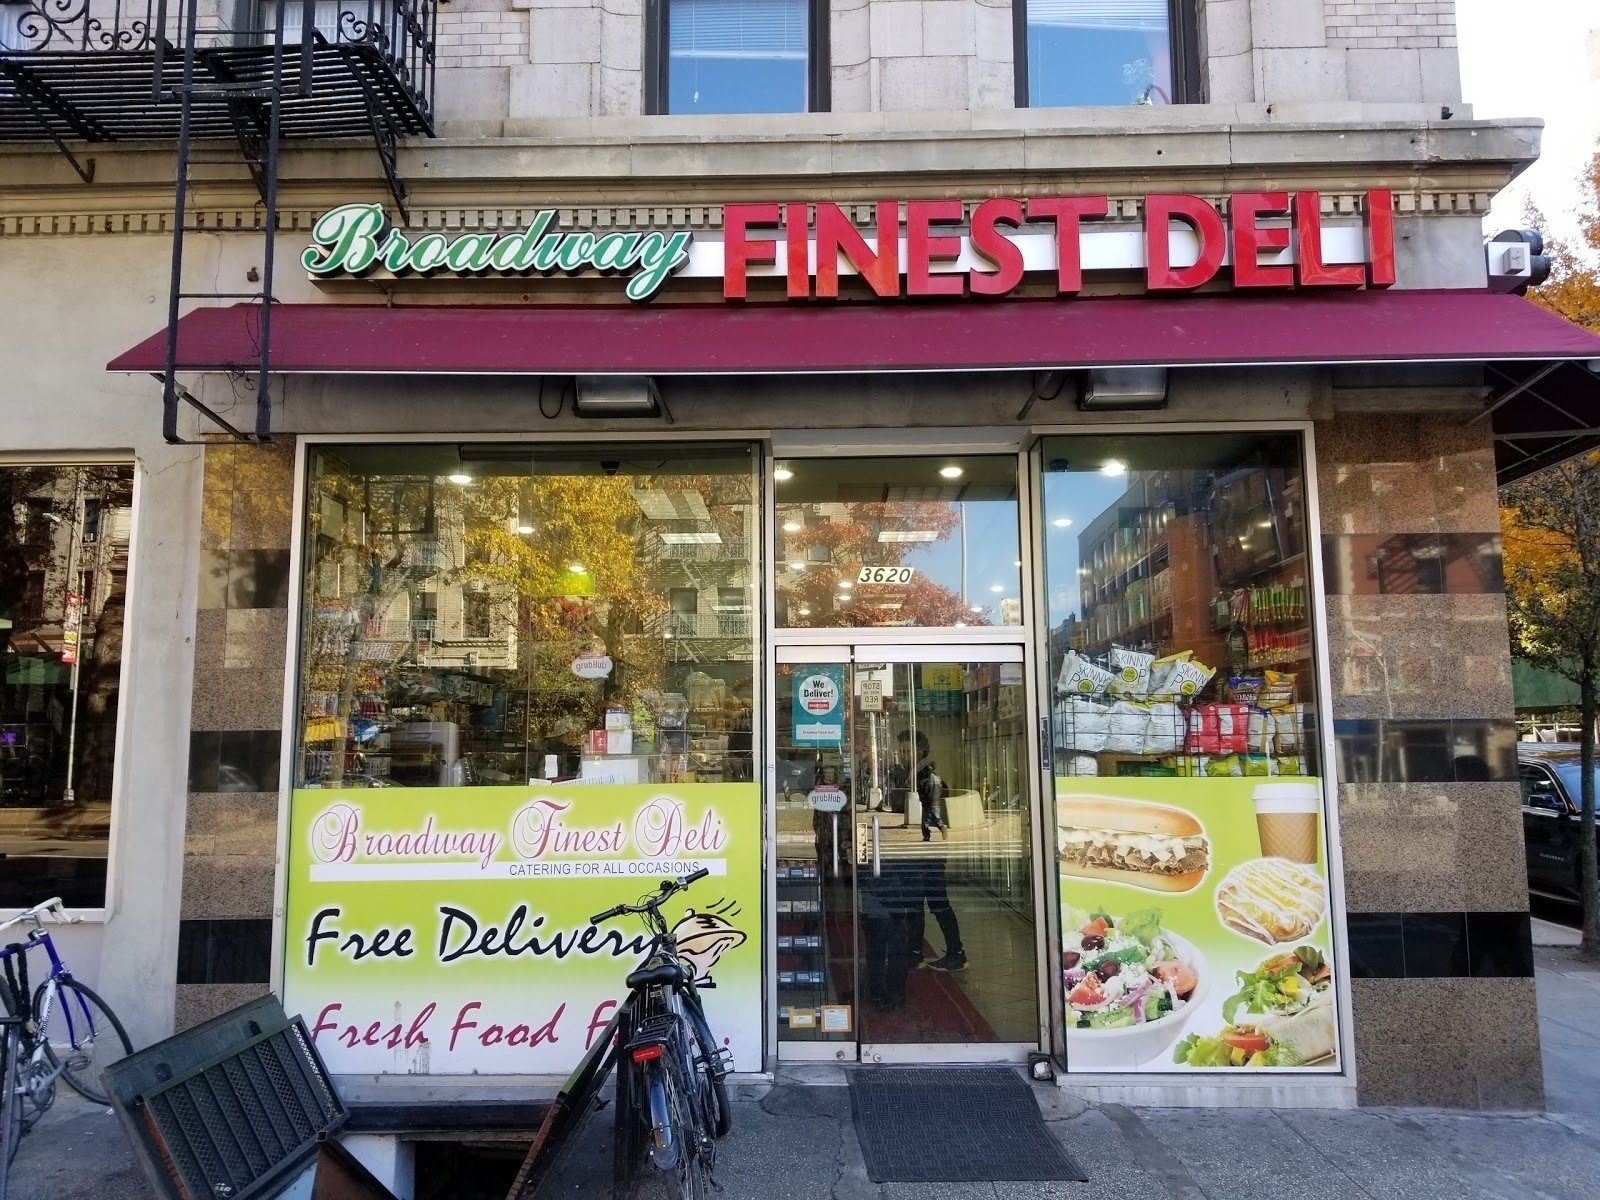 <span class="translation_missing" title="translation missing: en.meta.location_title, location_name: Broadway Finest Deli, city: New York">Location Title</span>